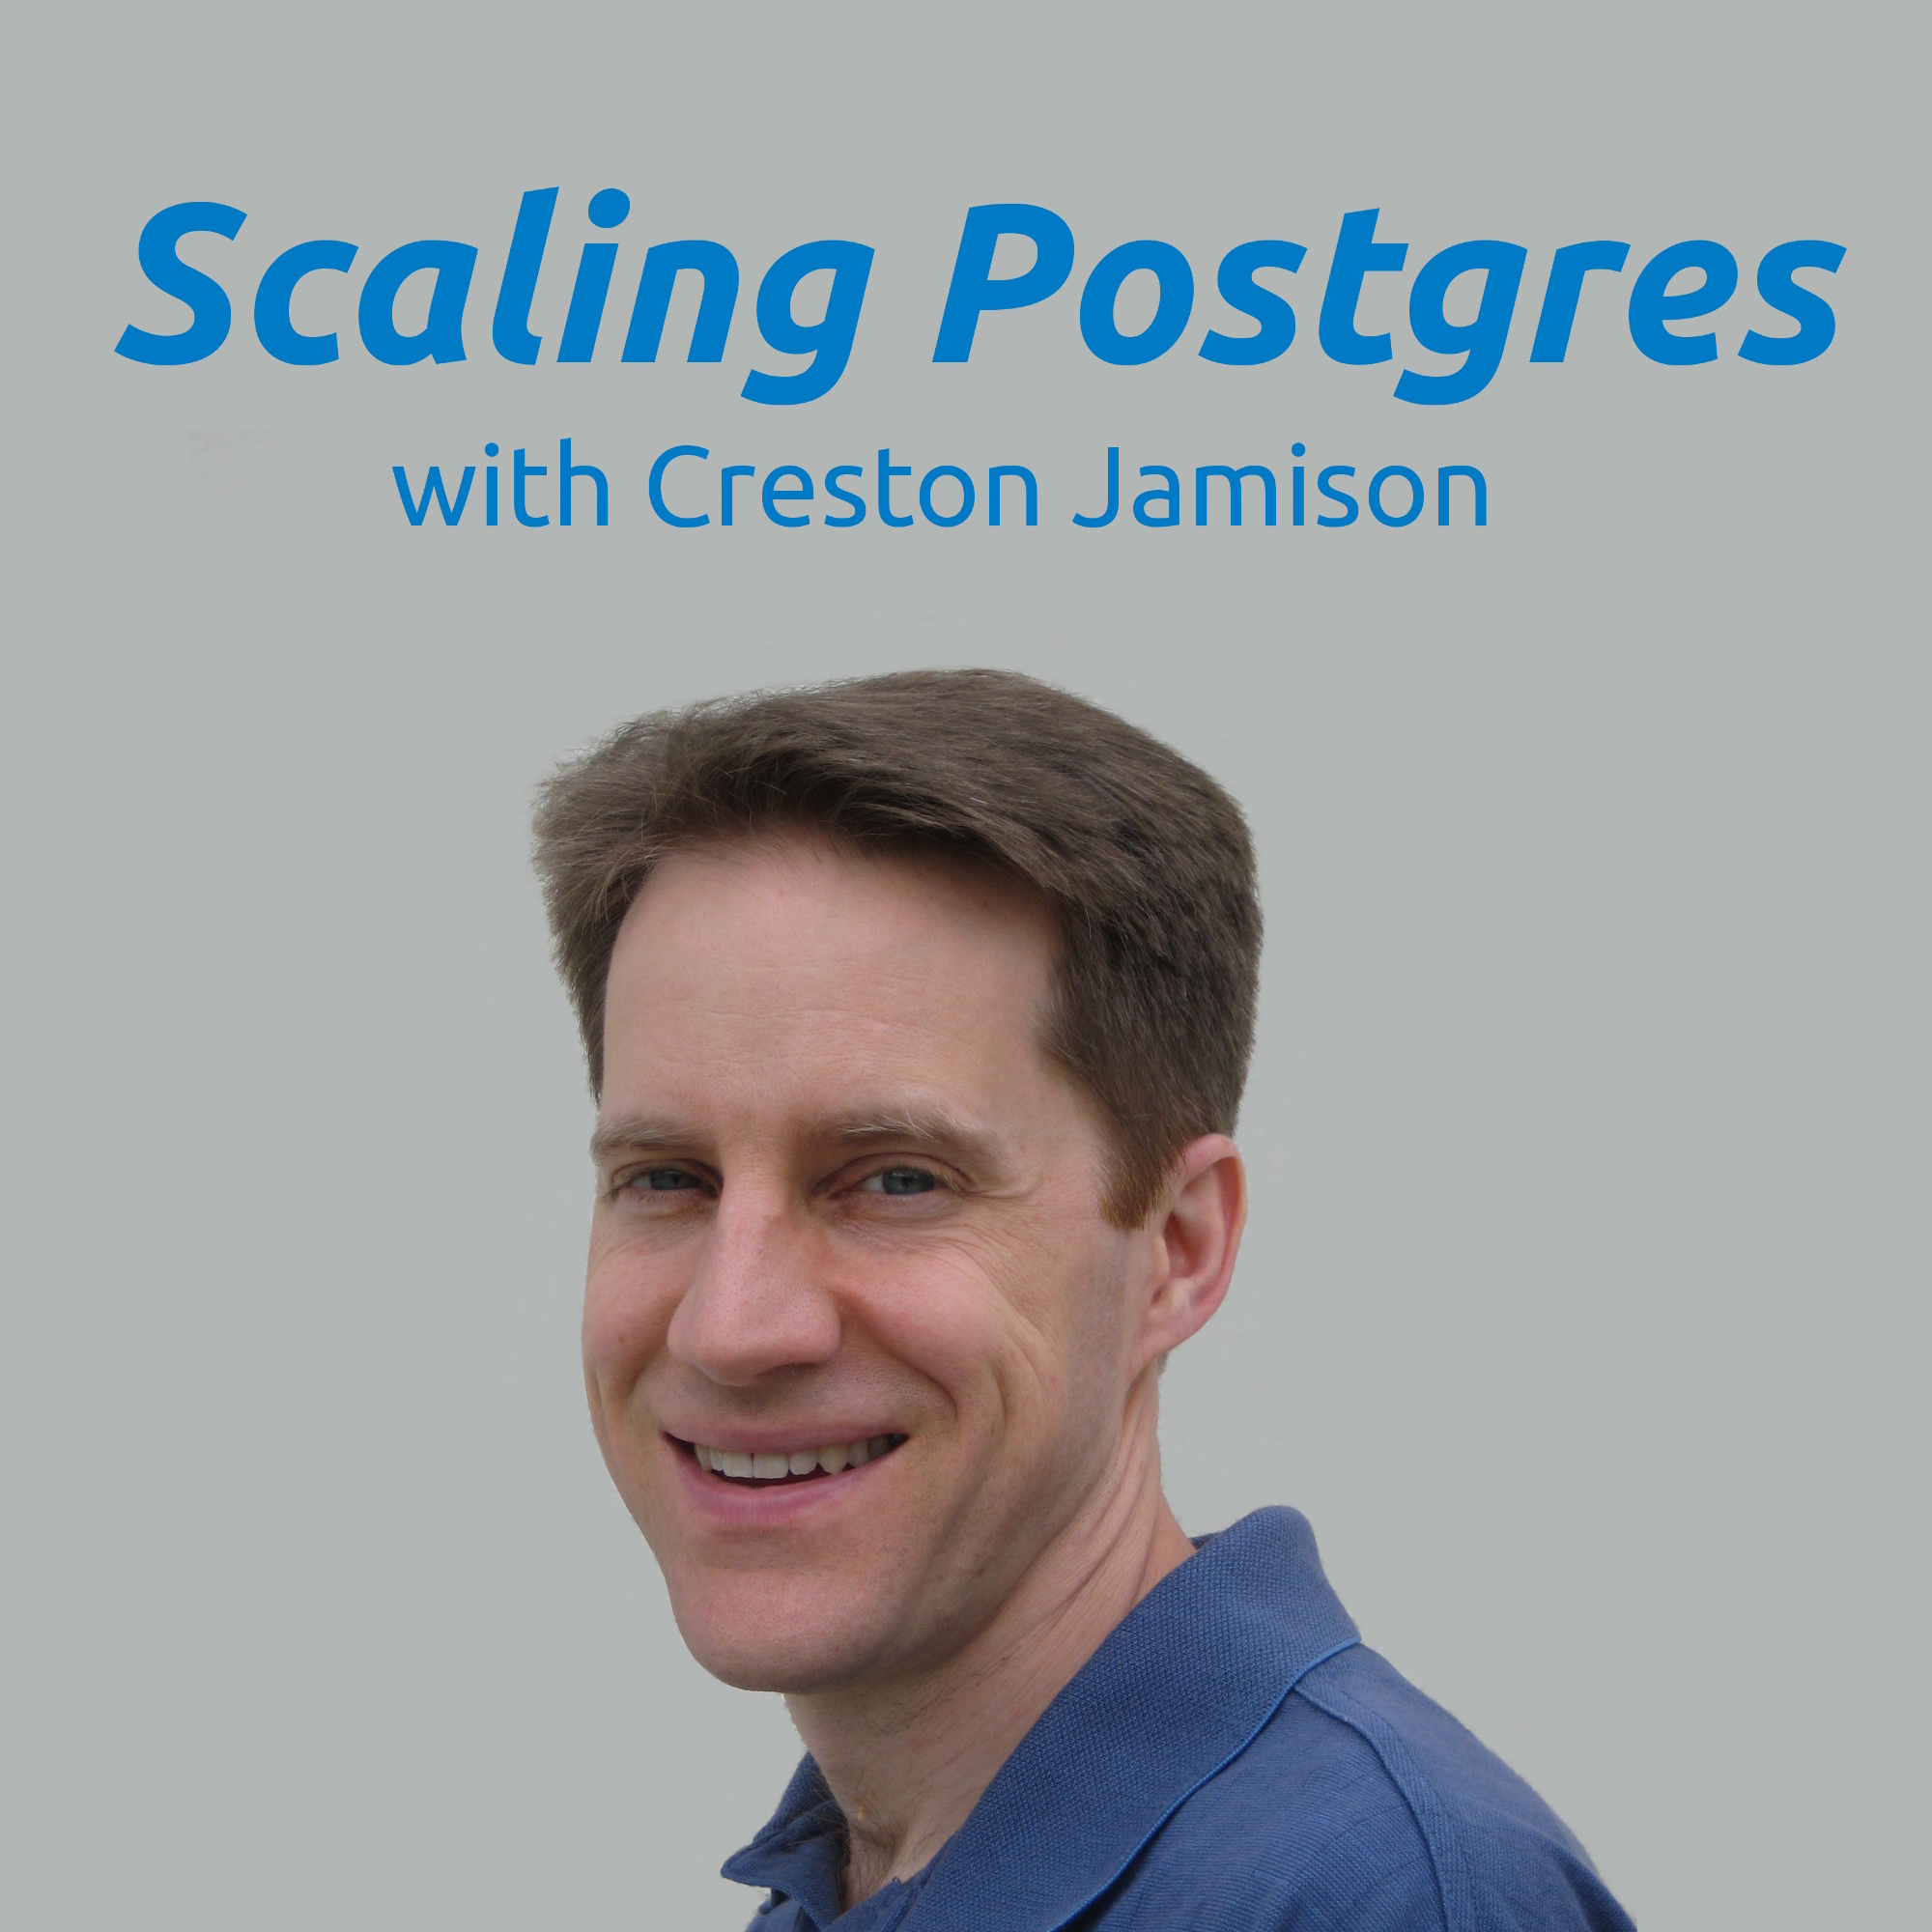 28 Tips, Lucky 13, Autovacuum Tuning, Logical Pitfalls | Scaling Postgres 129